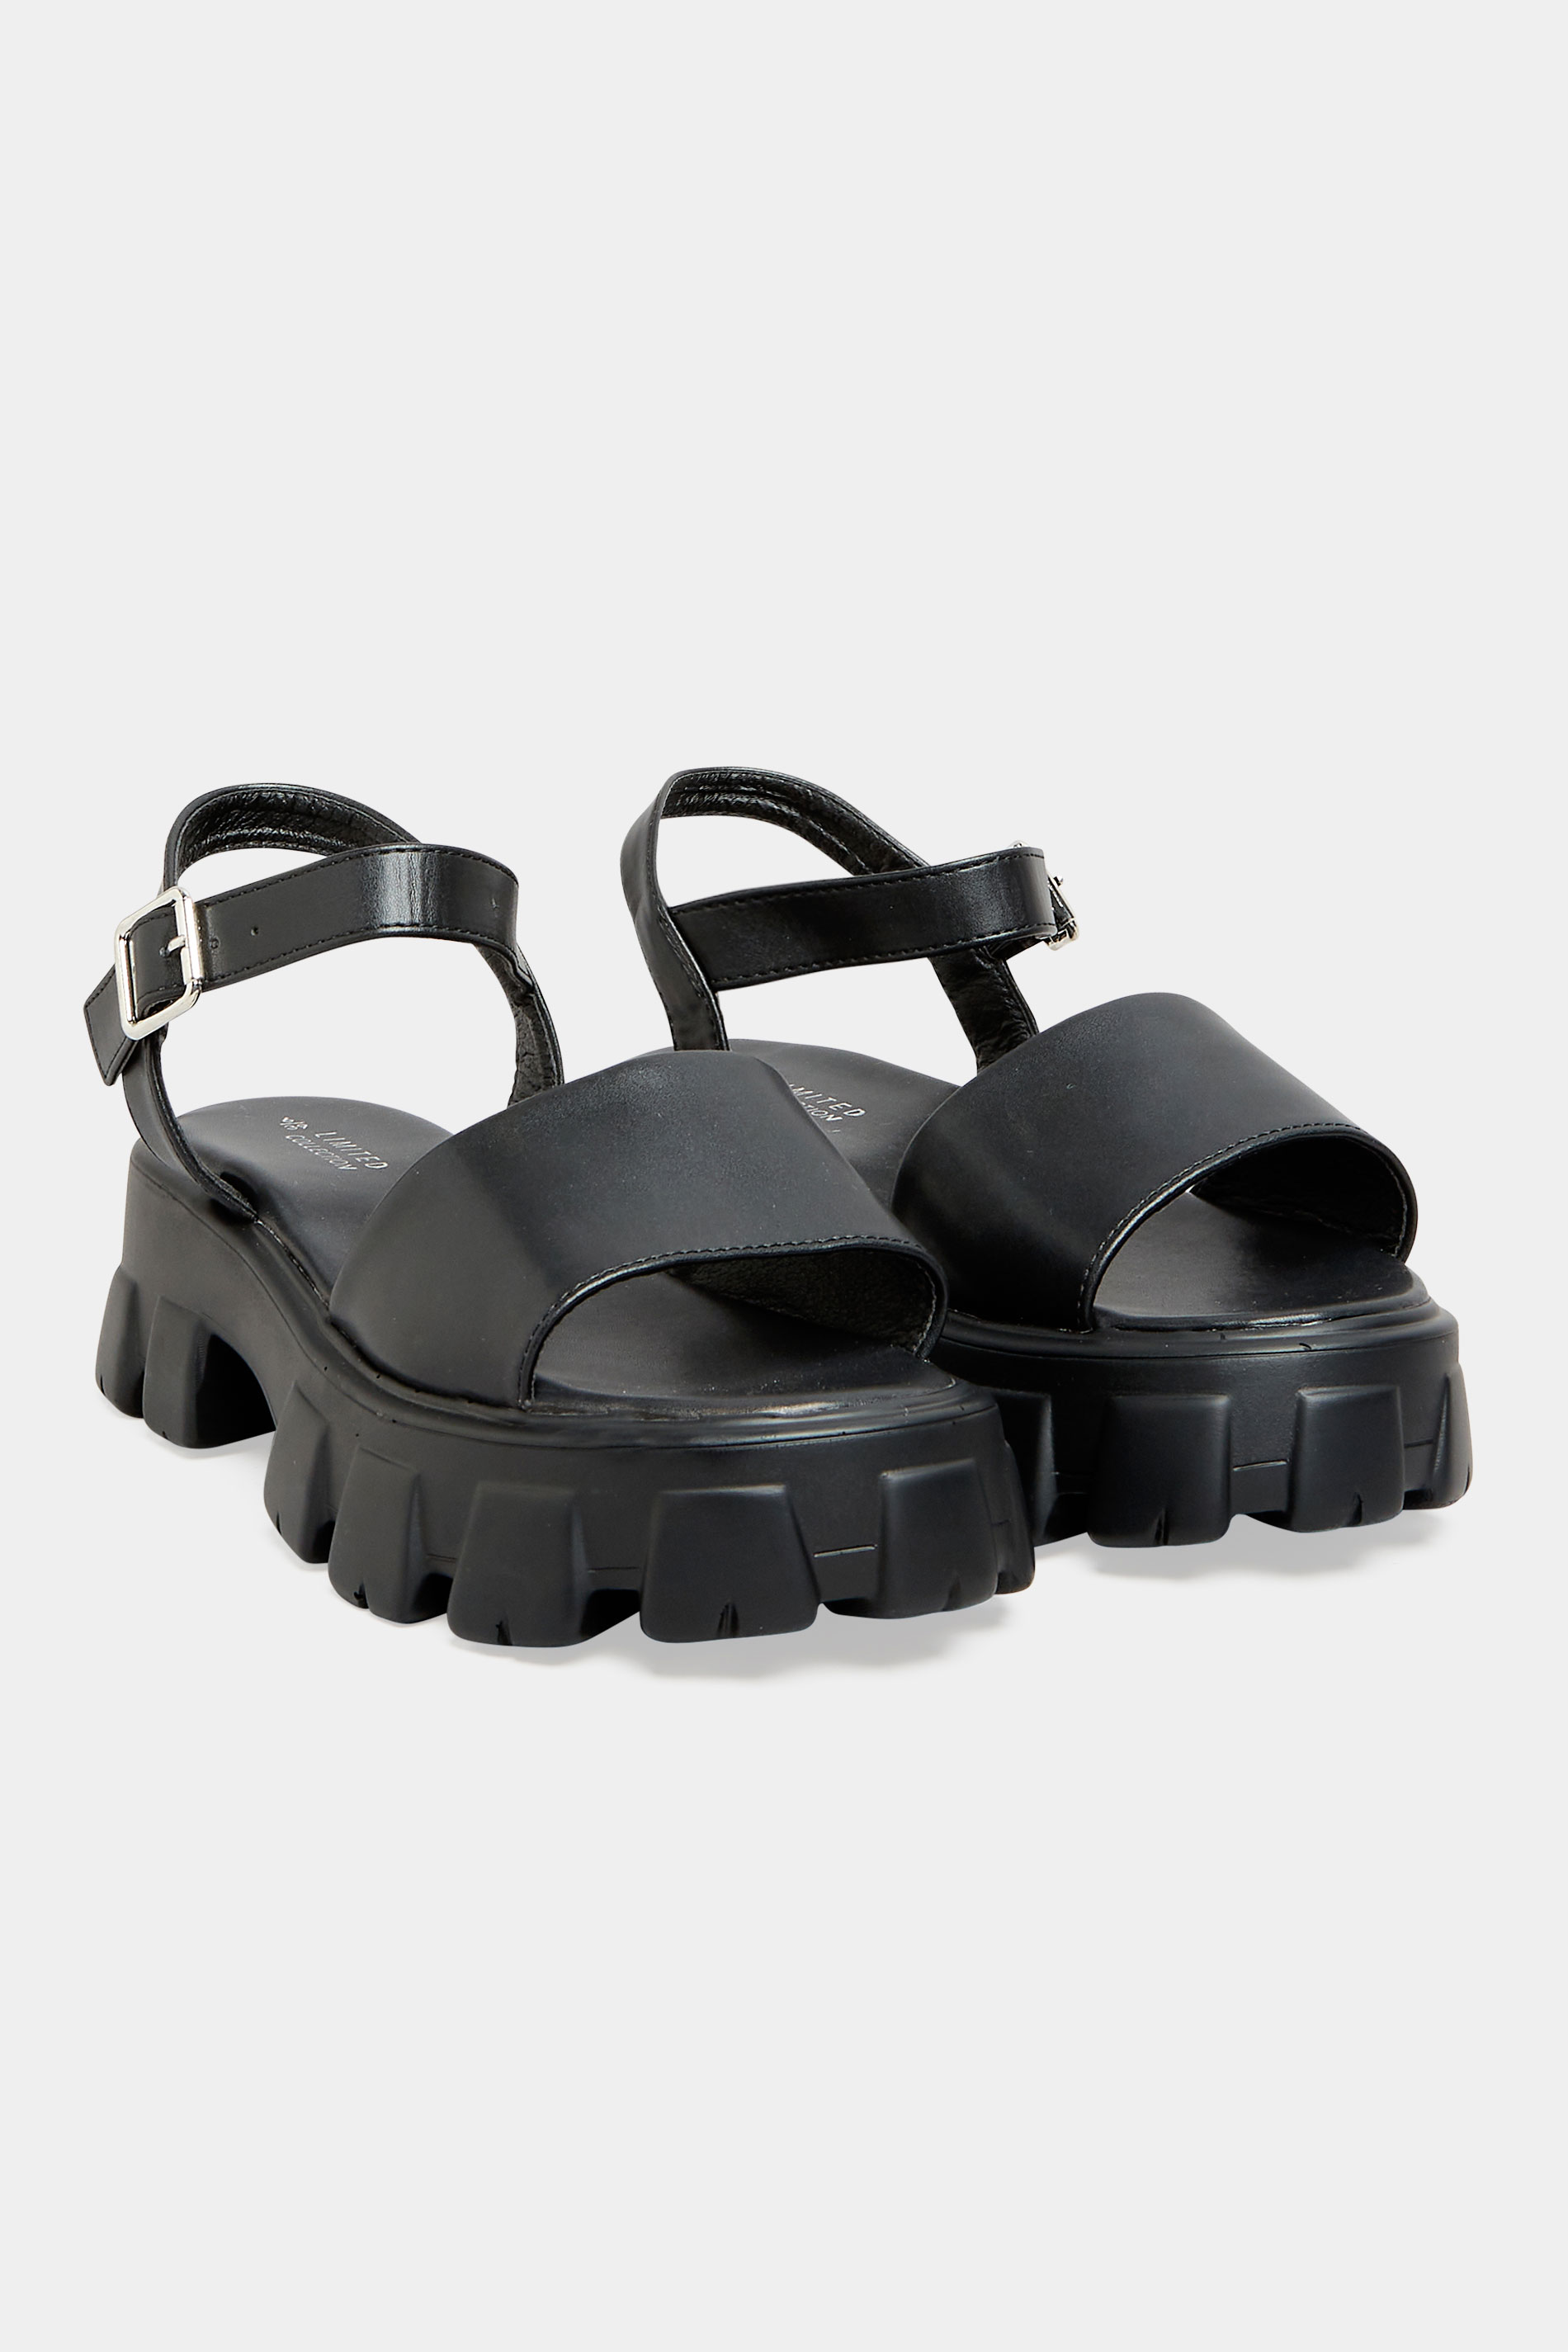 LIMITED COLLECTION Black Chunky Platform Sandals In Extra Wide EEE Fit_A.jpg